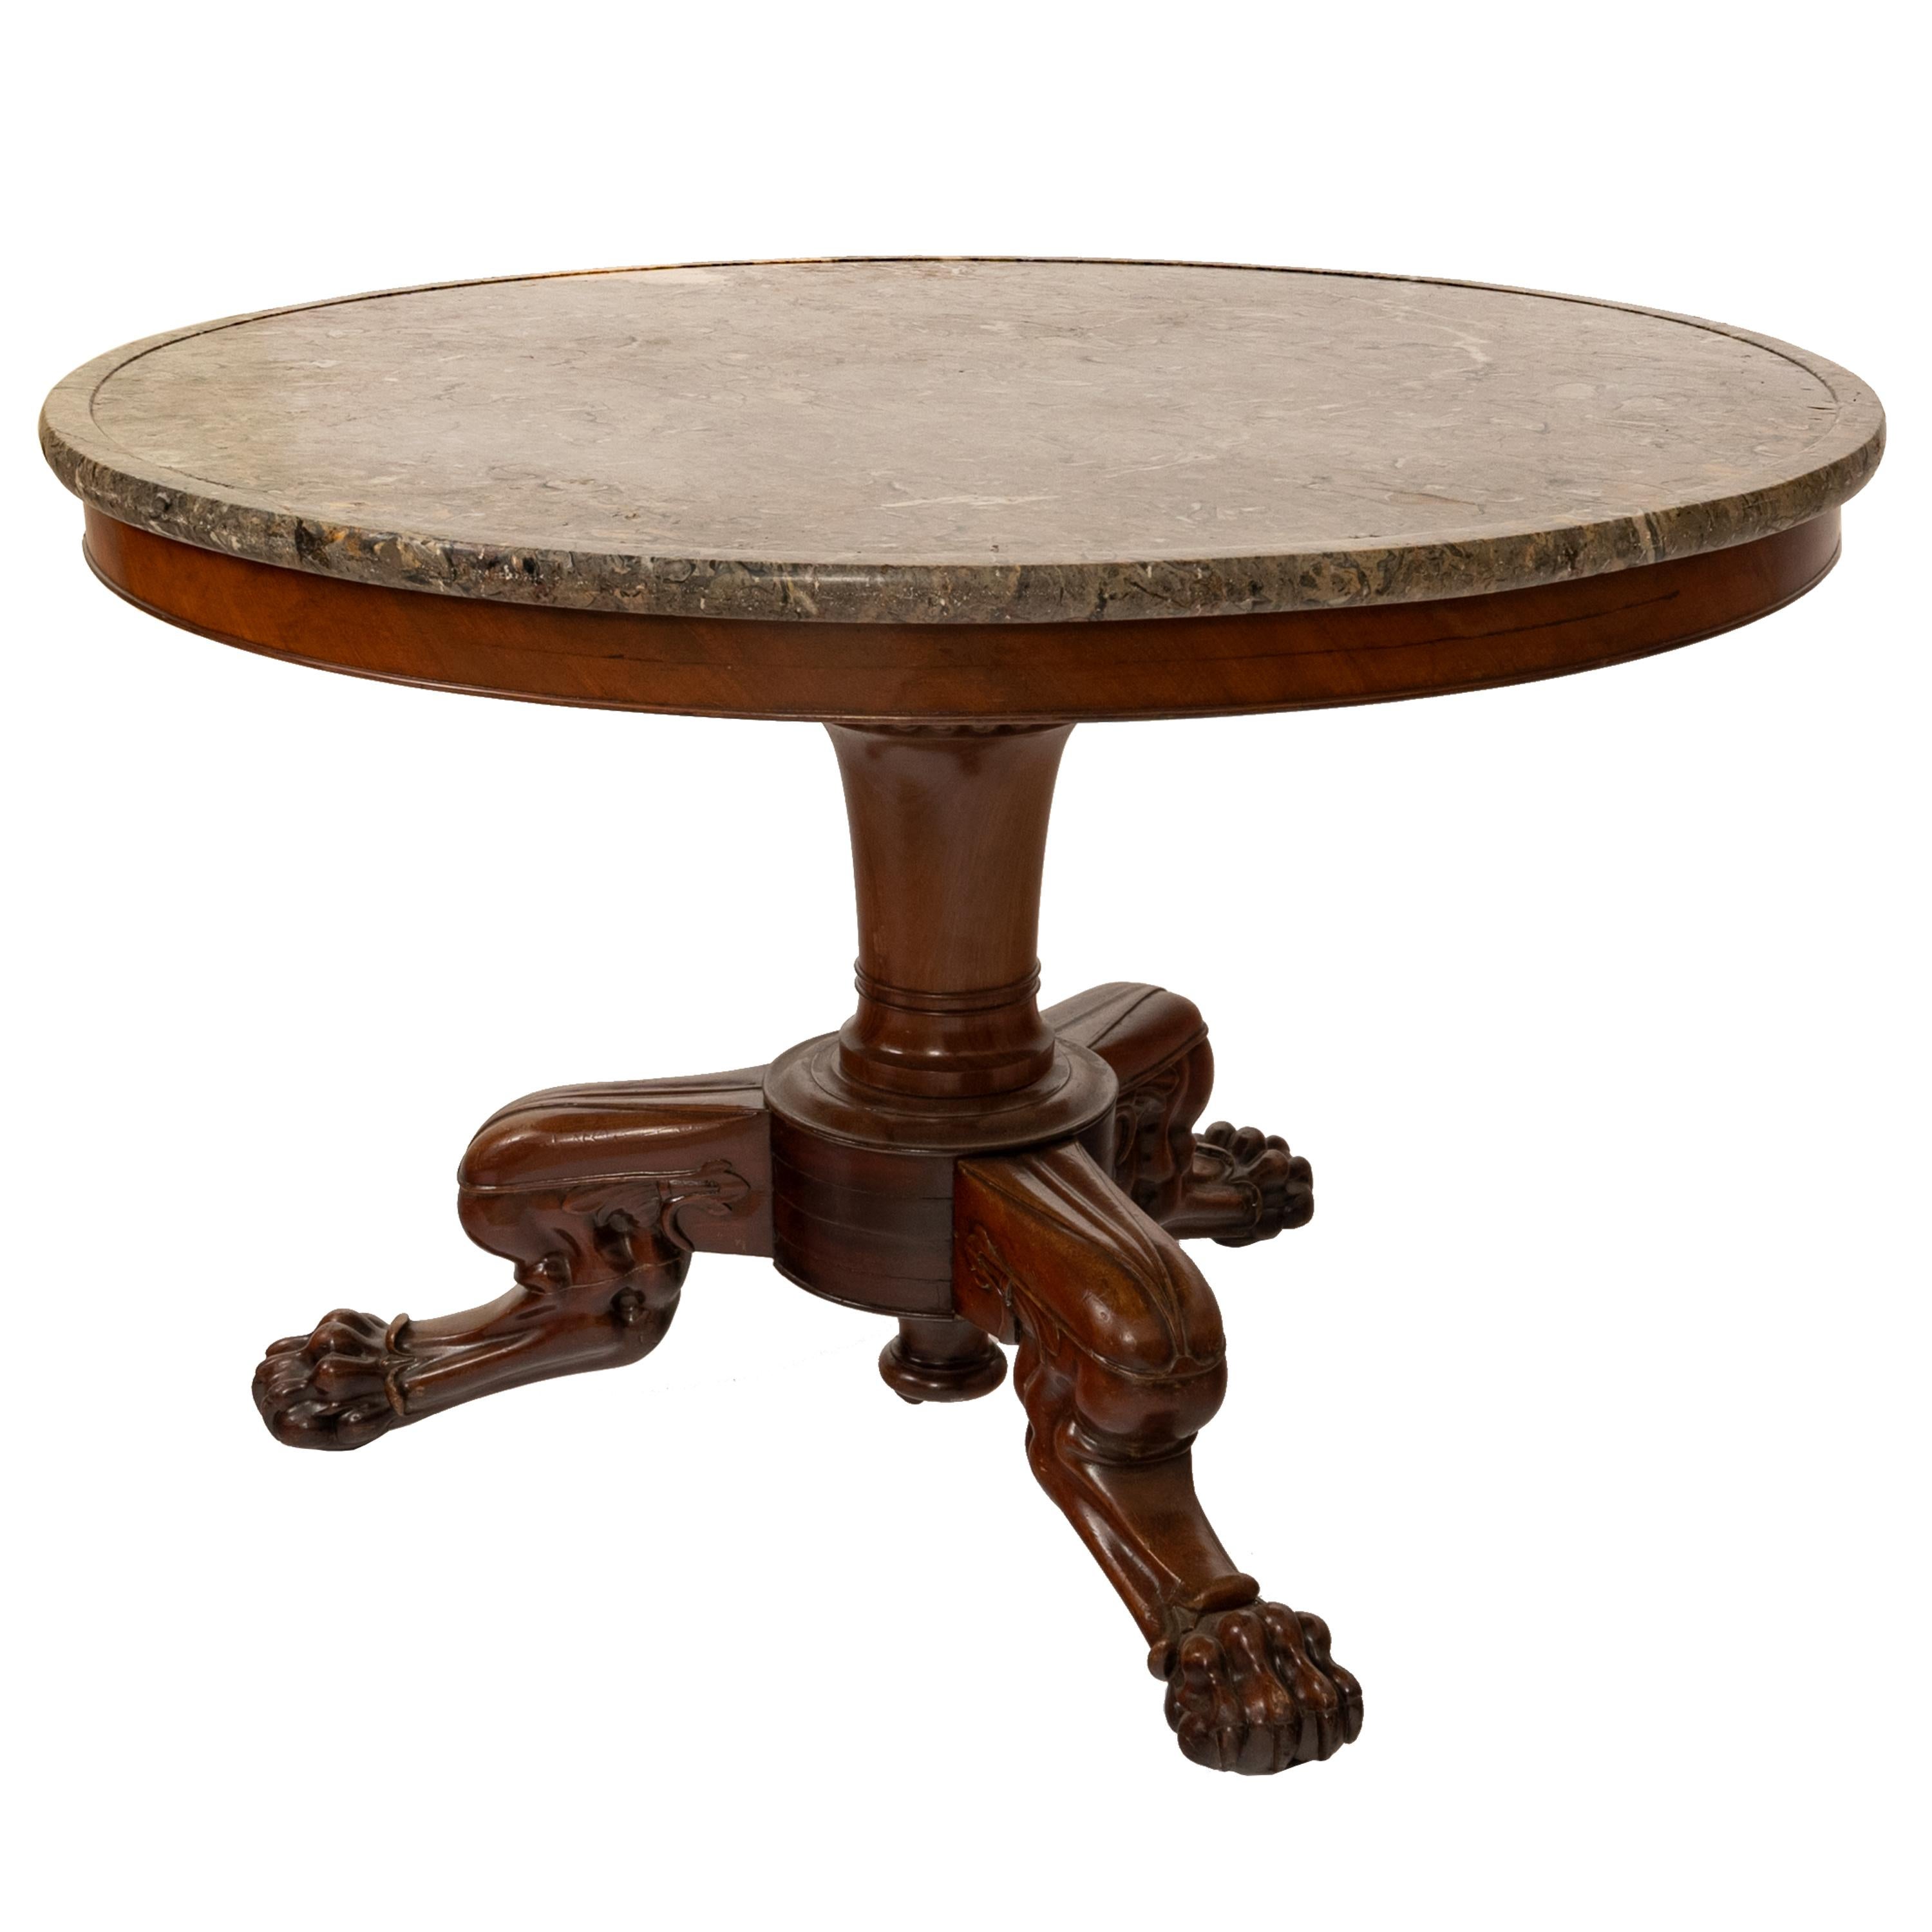 19th Century Antique French Louis Philippe Marble Top Carved Mahogany Round Tripod Table 1850